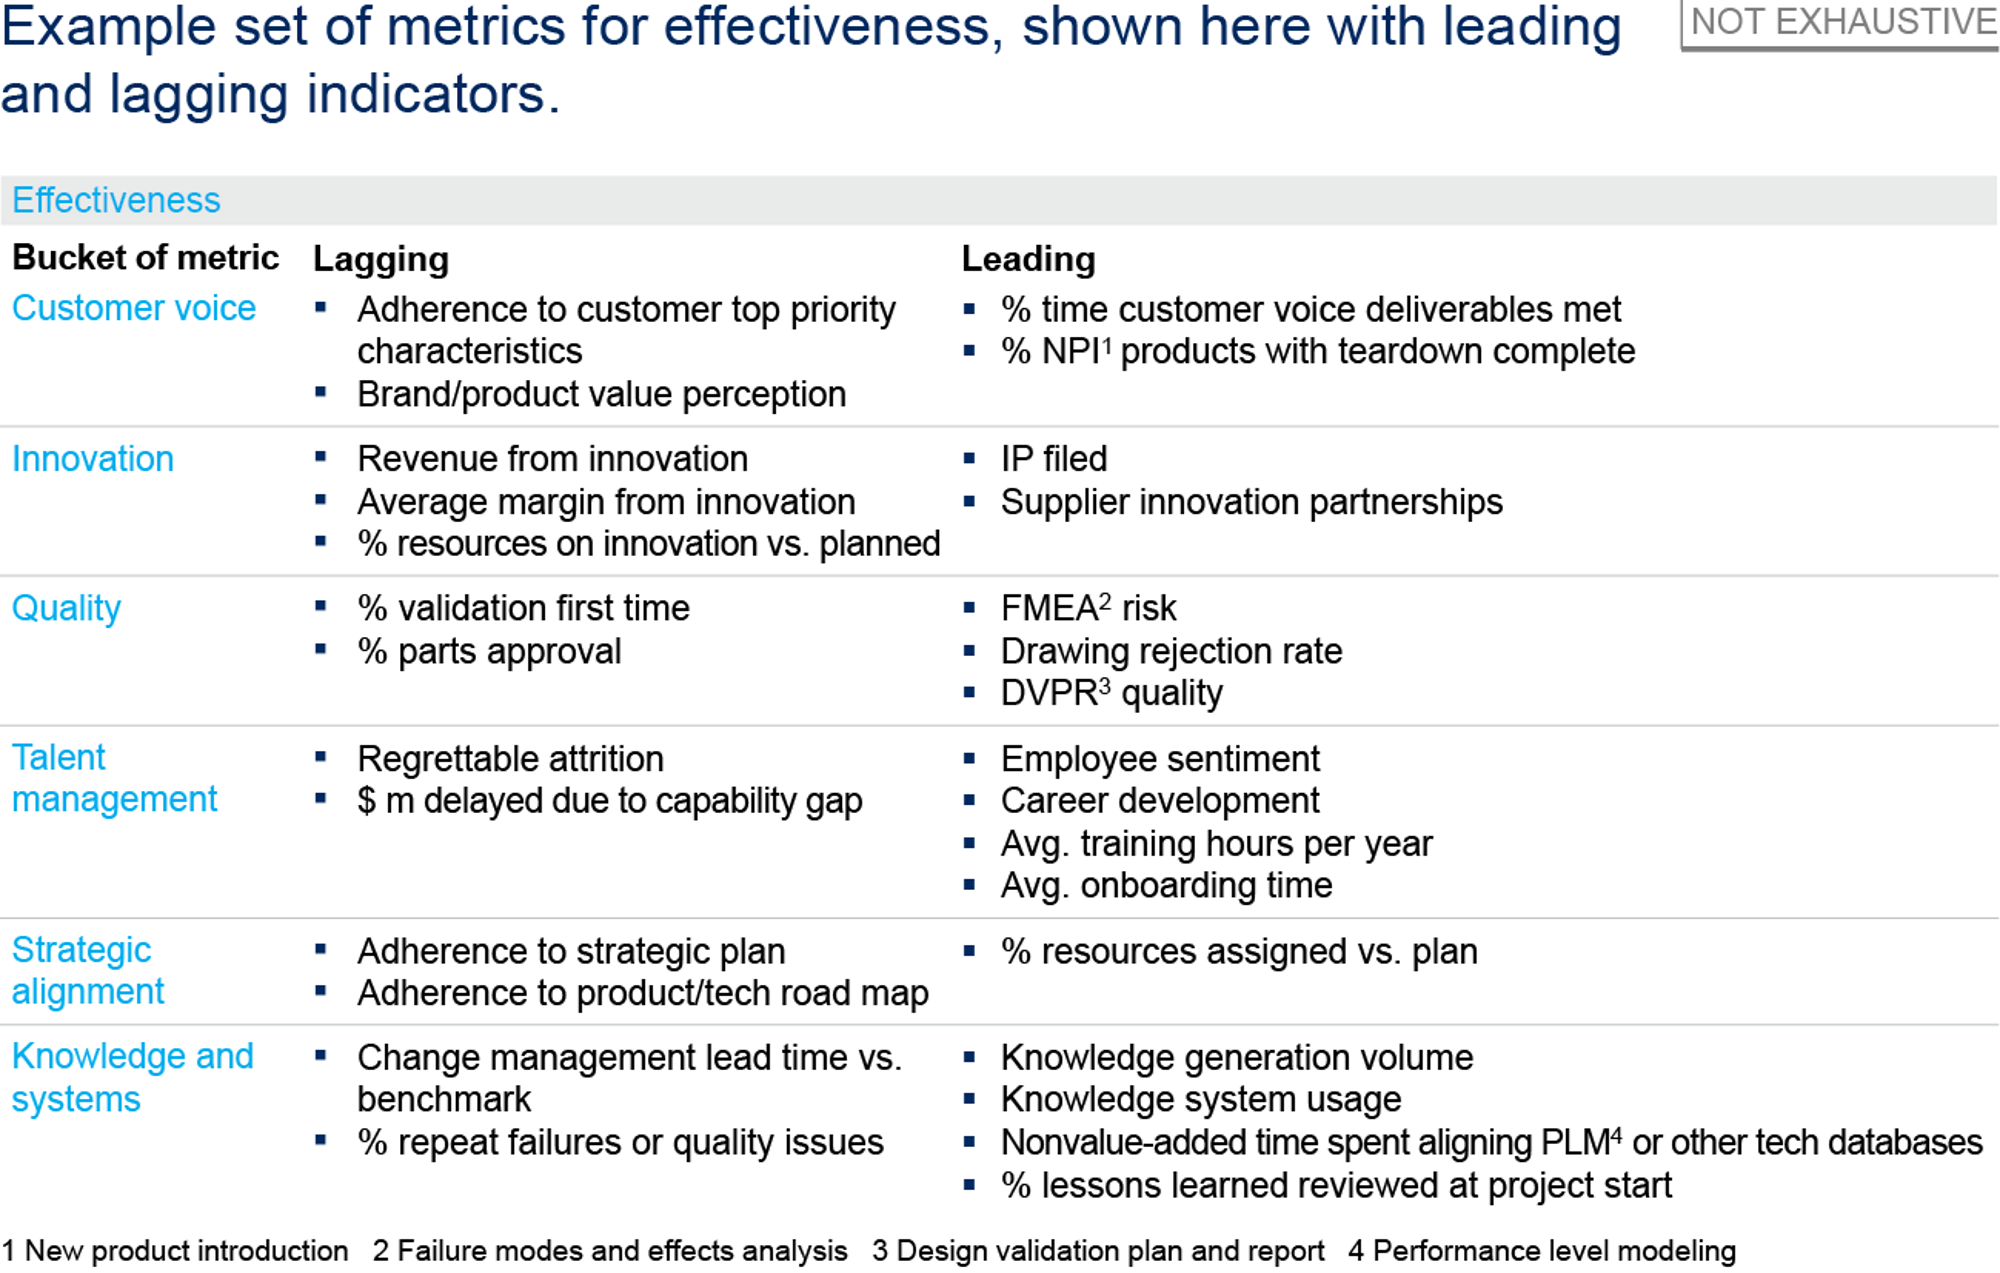 Gauging Internal Efficiency And Effectiveness With Leading And Lagging Indicators Mckinsey